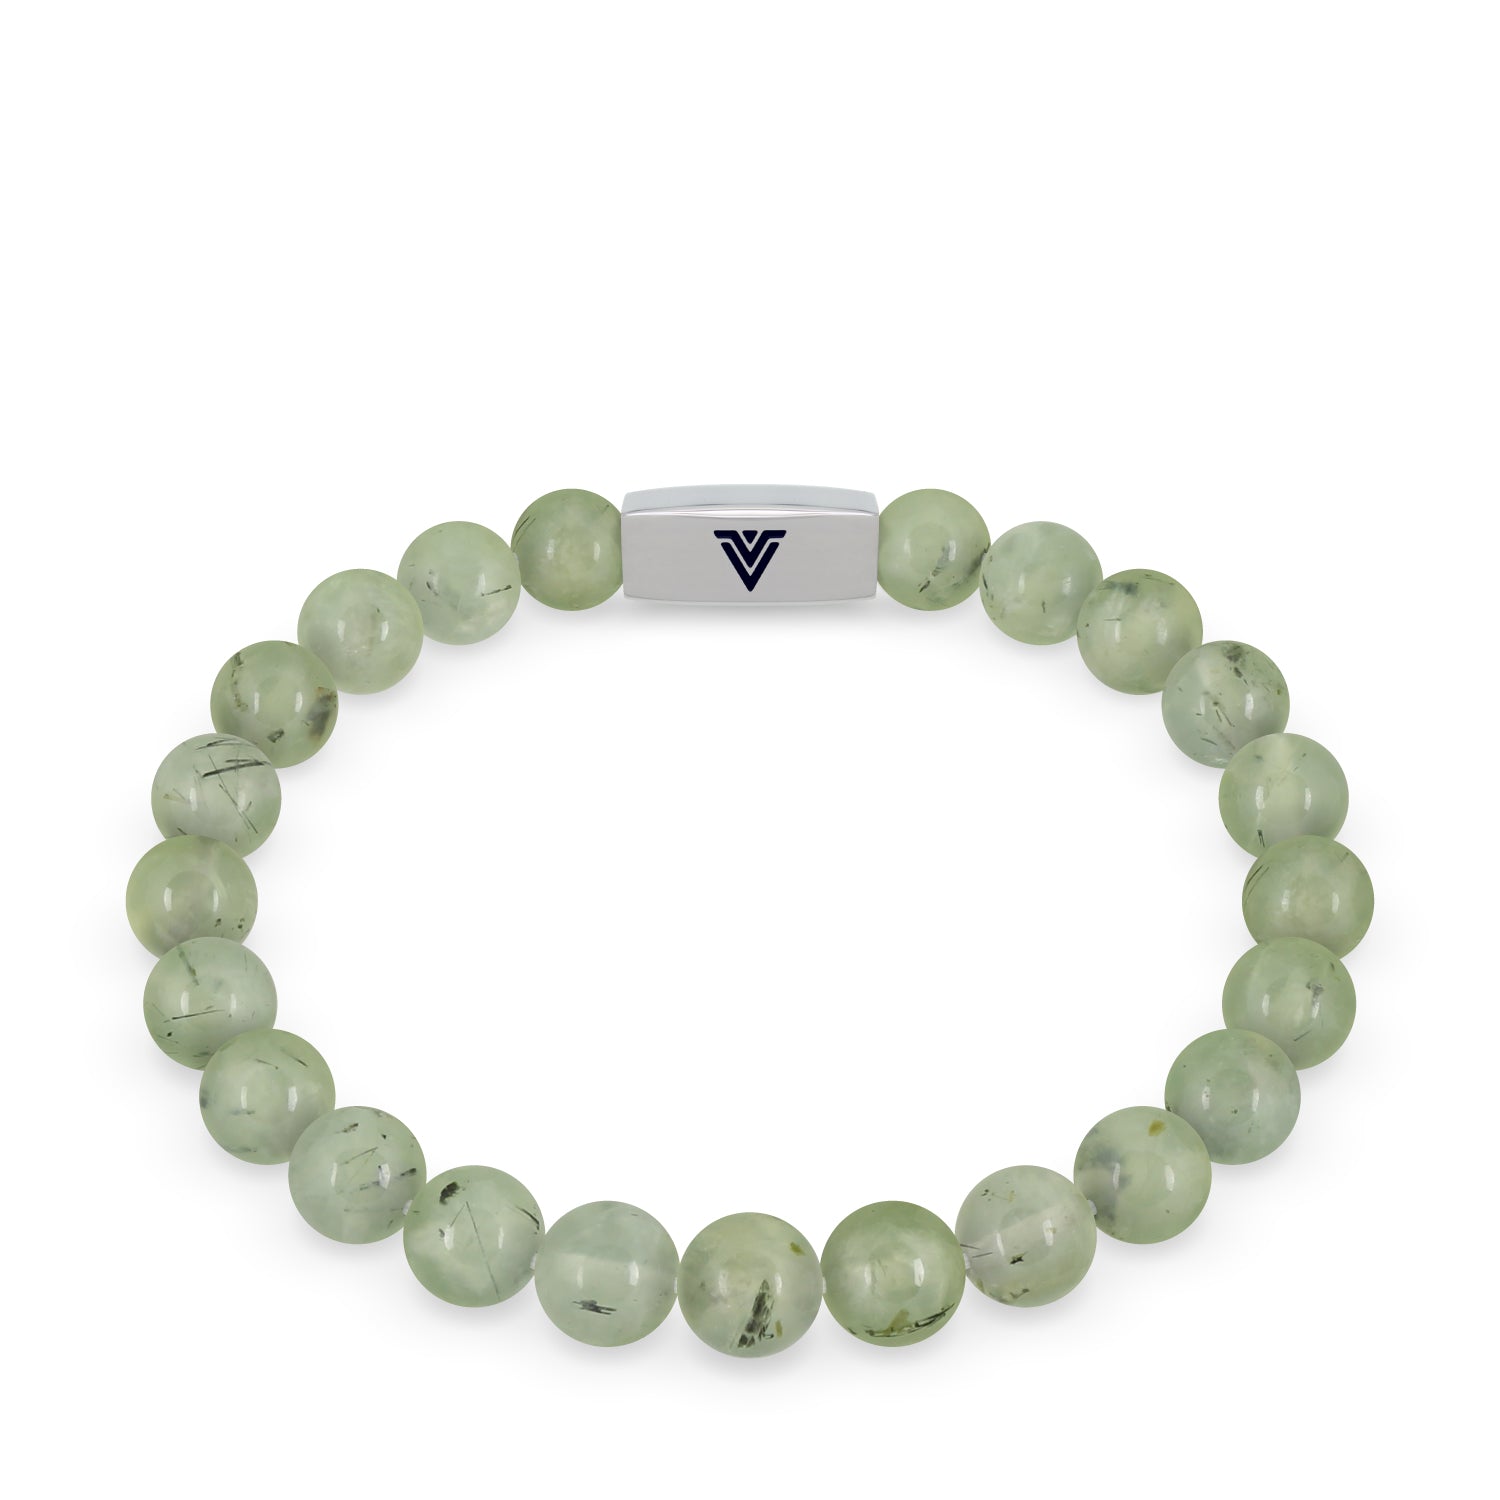 Front view of an 8mm Prehnite beaded stretch bracelet with silver stainless steel logo bead made by Voltlin